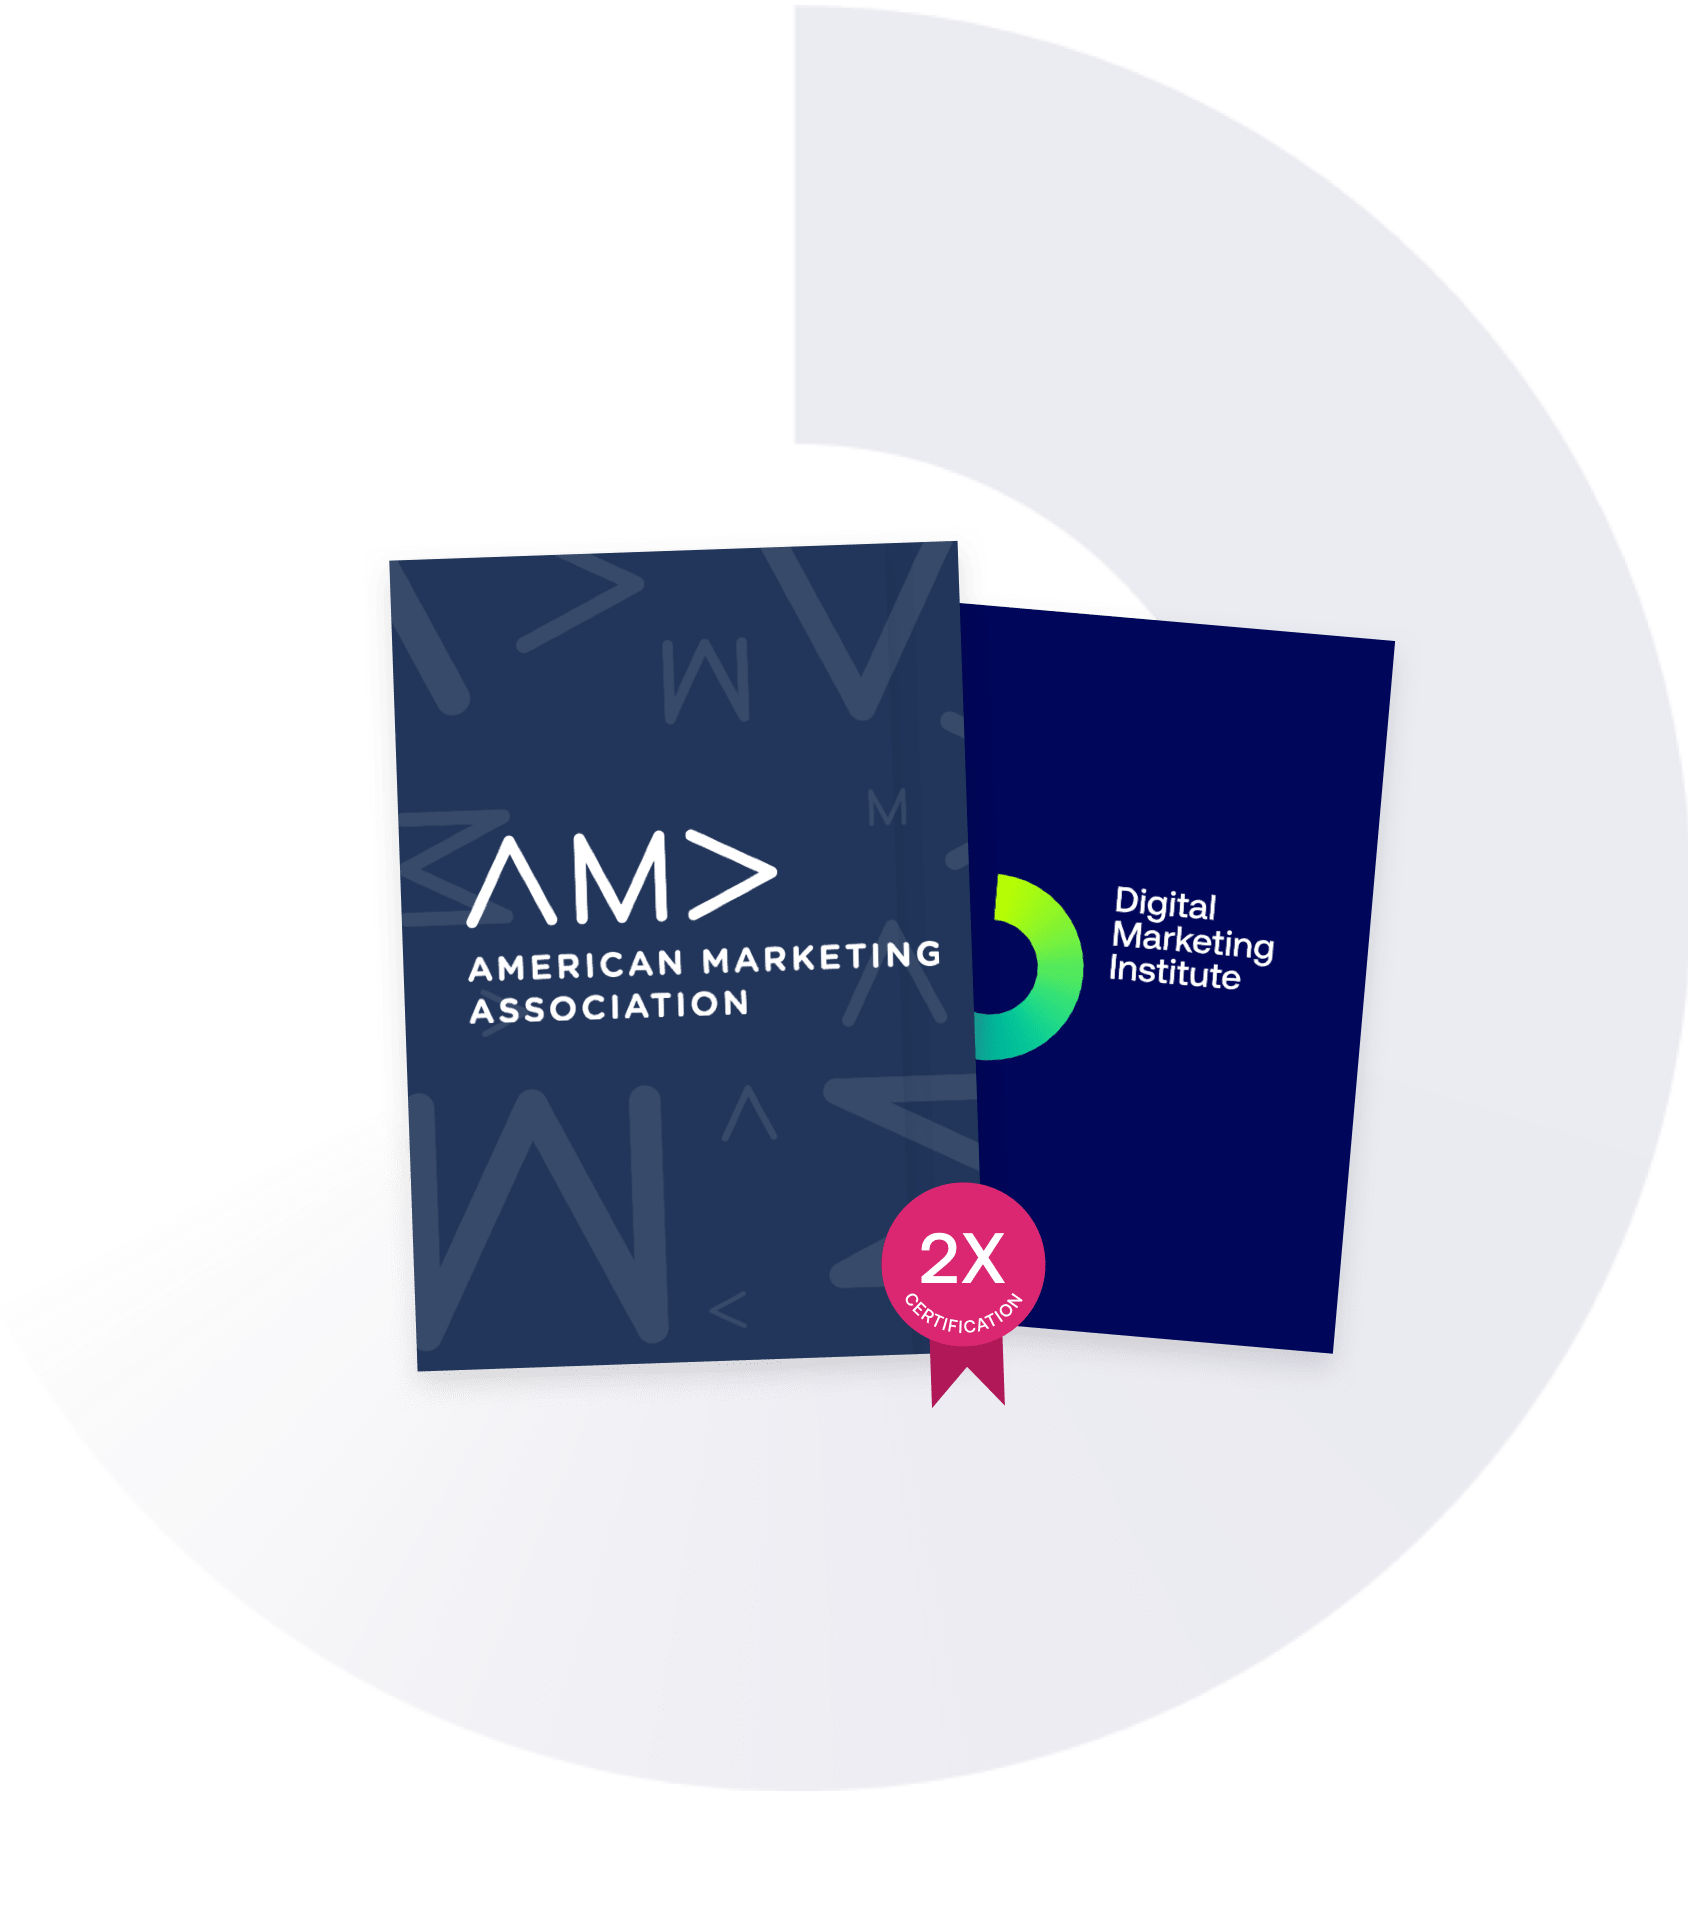 4100+ Best Digital Marketing Courses and Certifications for 2023